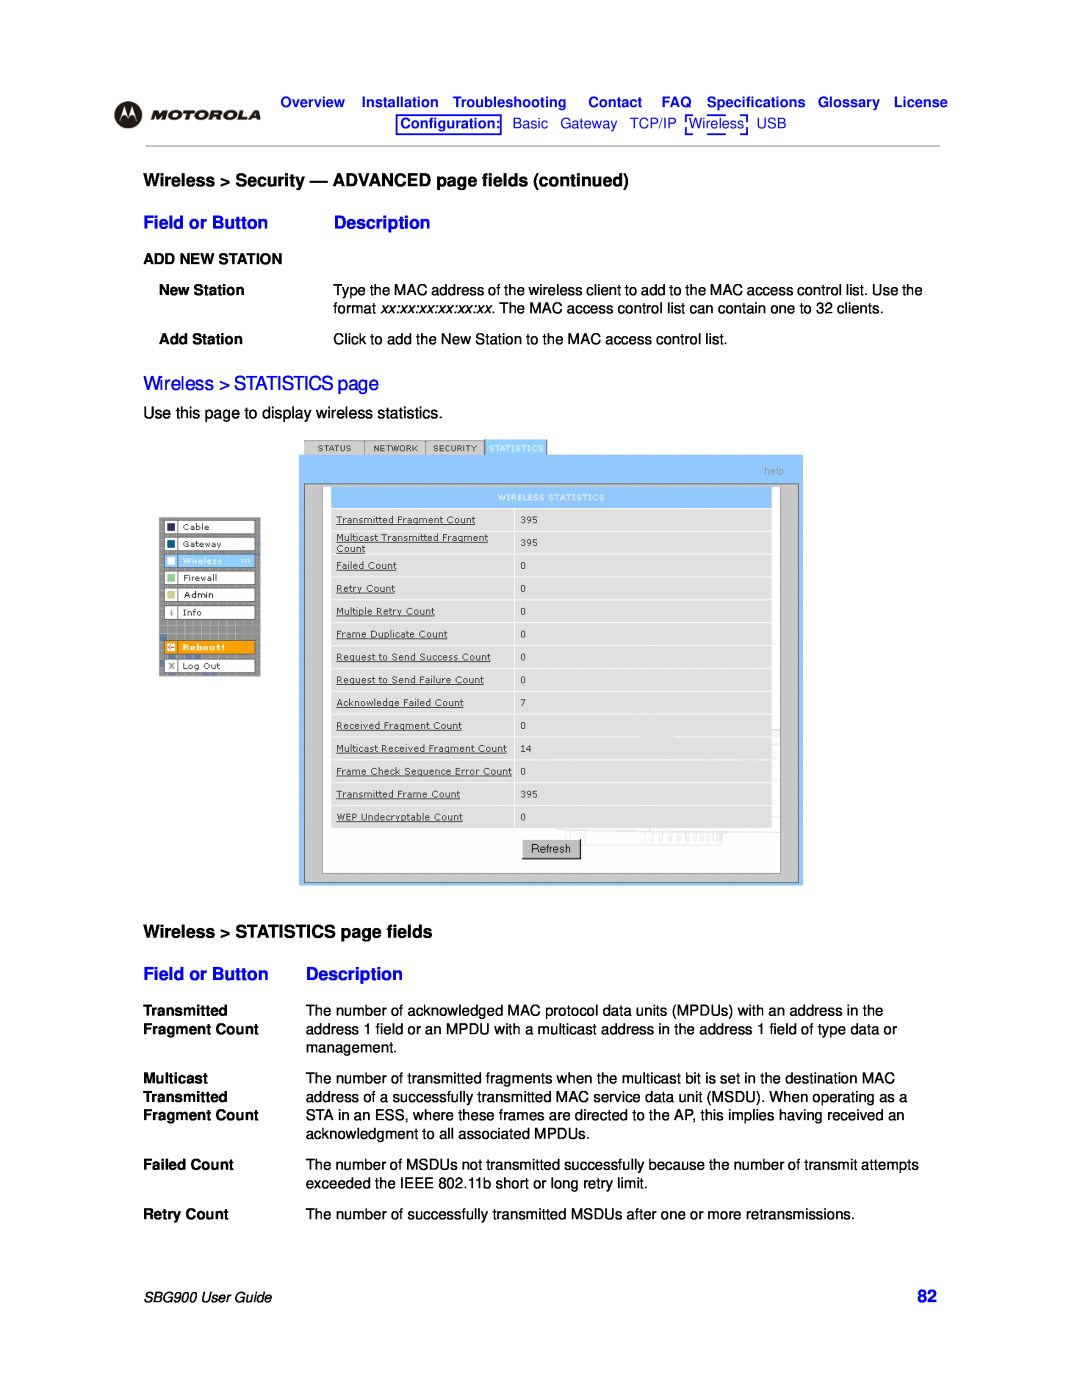 Motorola SBG900 Wireless STATISTICS page, Wireless Security - ADVANCED page fields continued, Field or Button, Description 